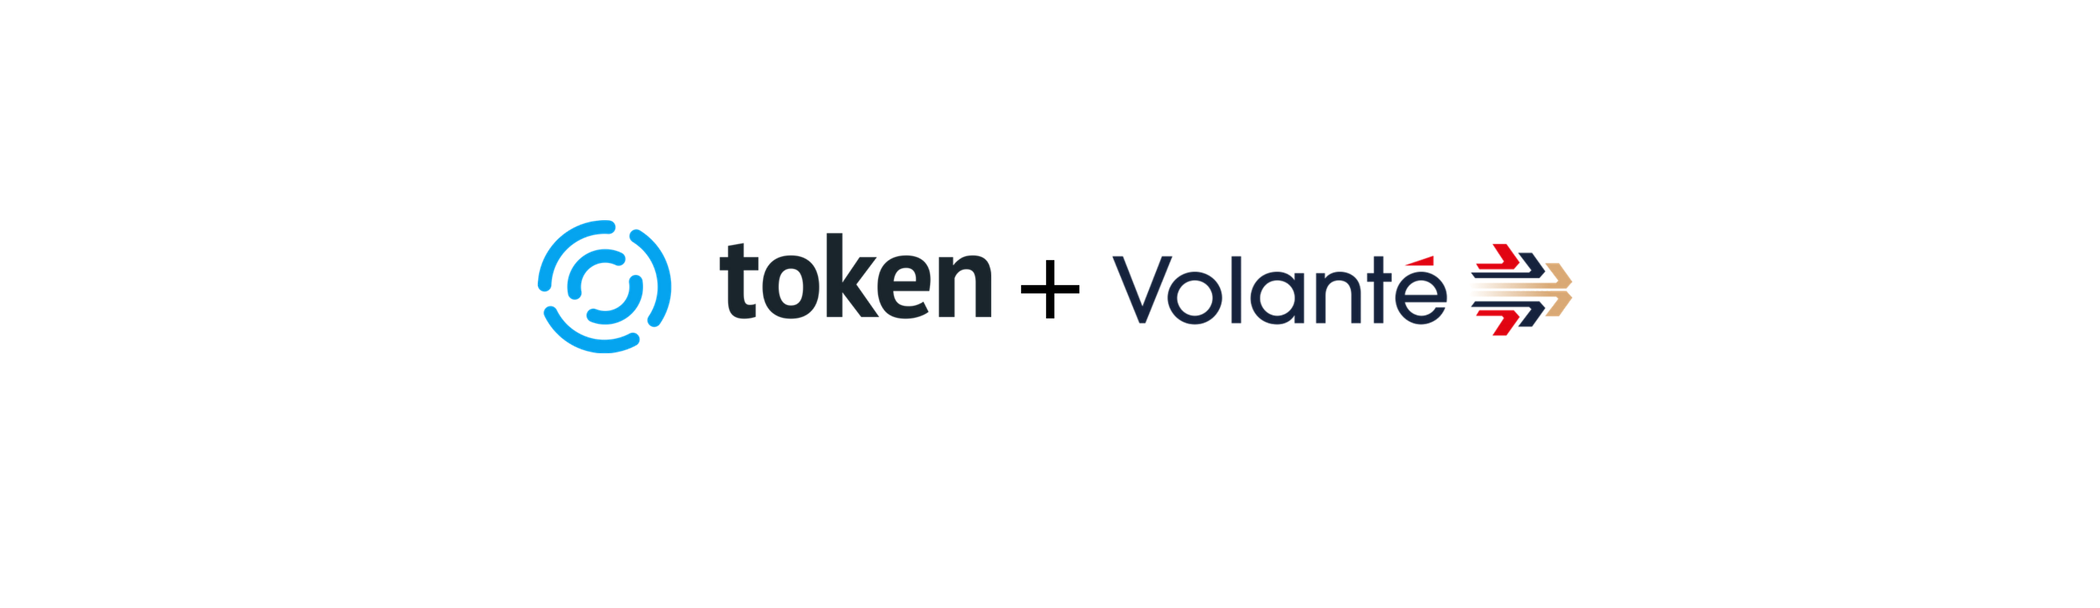 QIB (UK) plc selects Volante Technologies’ PSD2 Open Banking solution